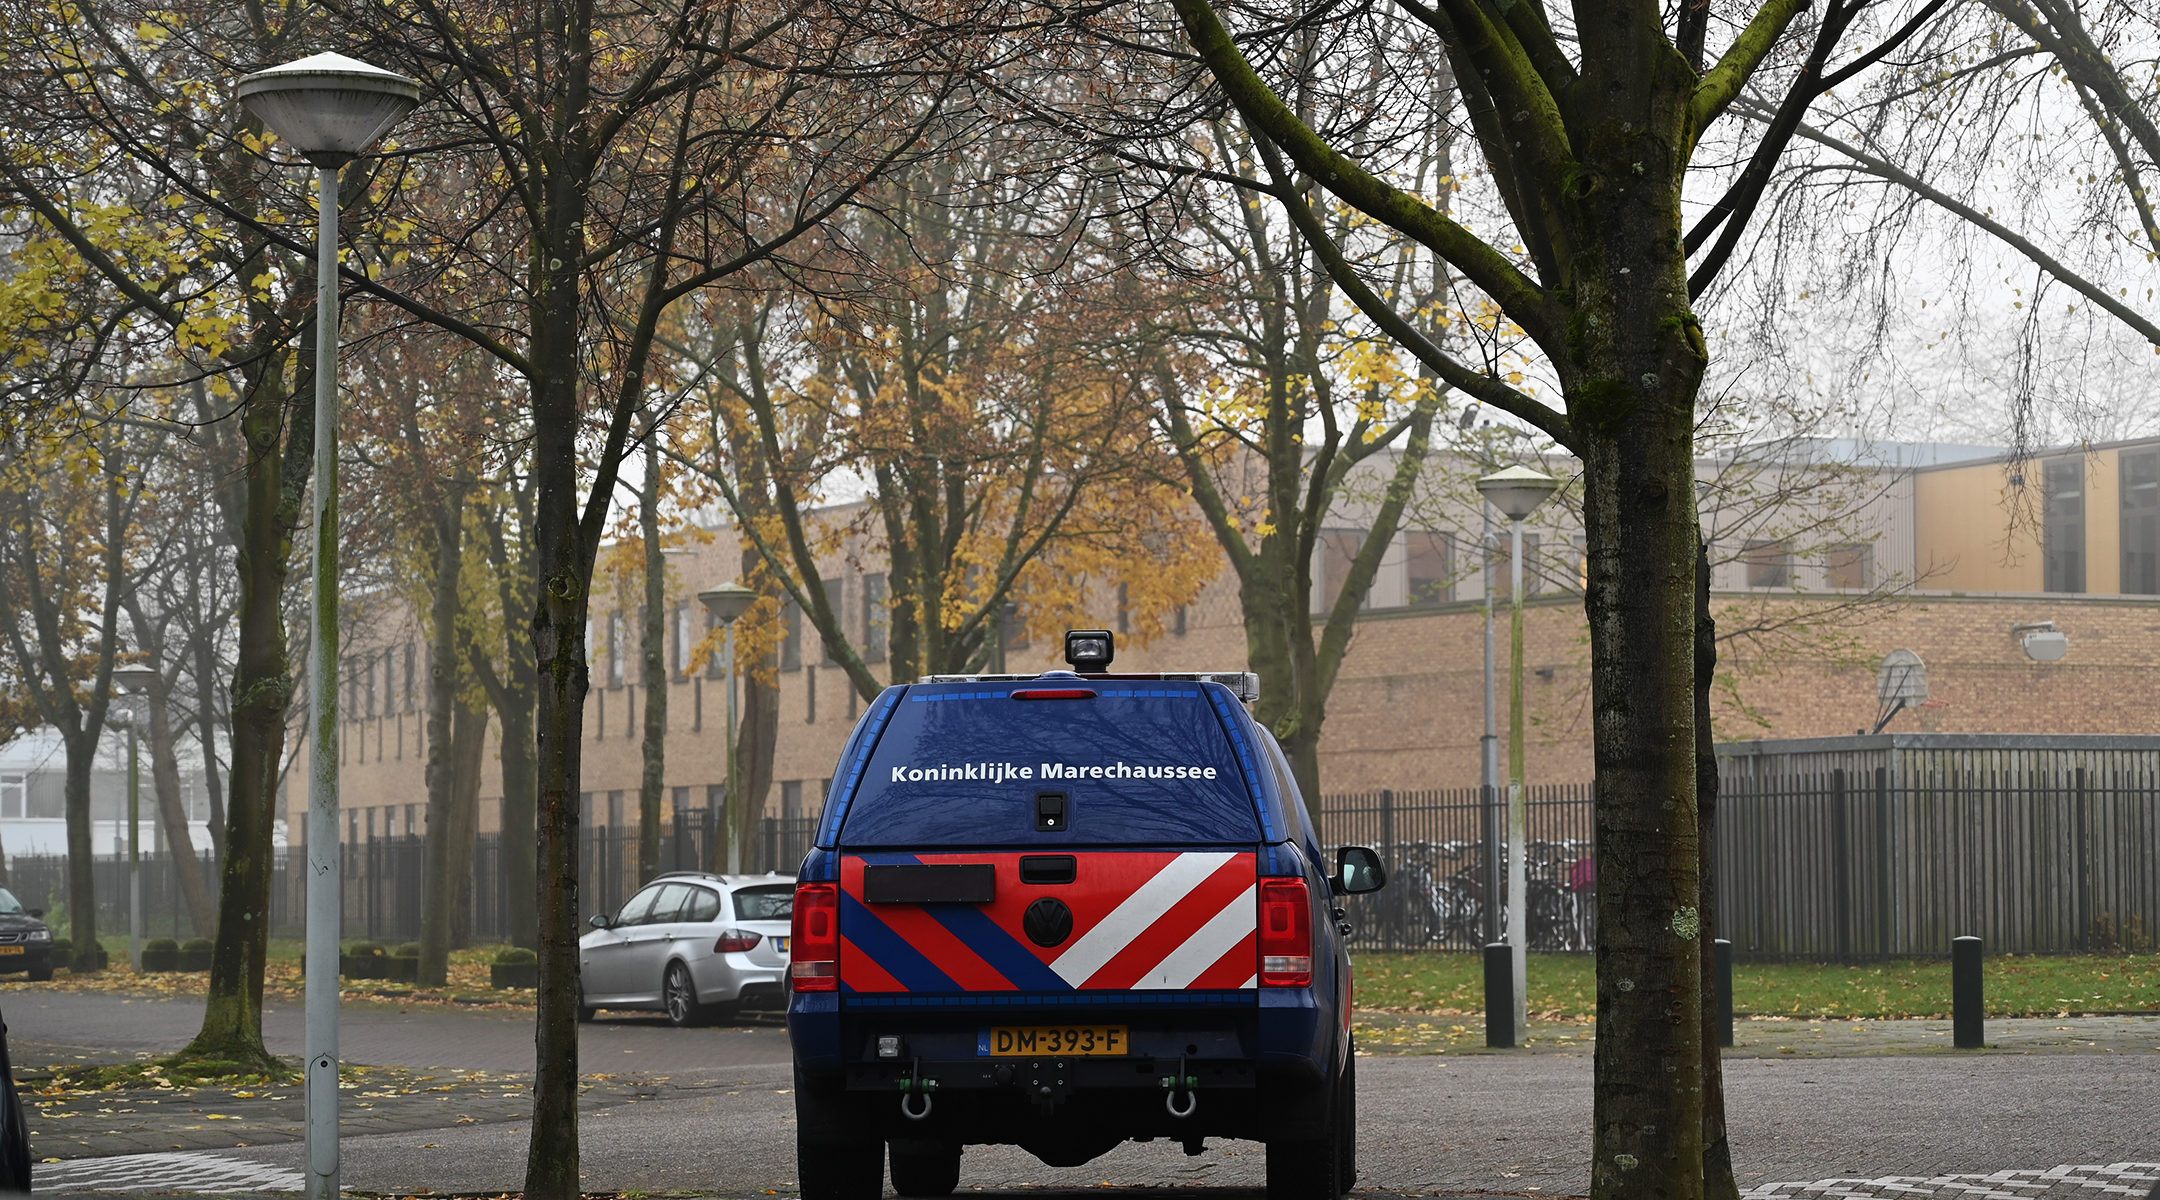 A car belonging to the Dutch security forces guarding the Maimonides and Rosj Pina Jewish schools in Amsterdam, the Netherlands on Nov. 25, 2019. (Cnaan Liphshiz)